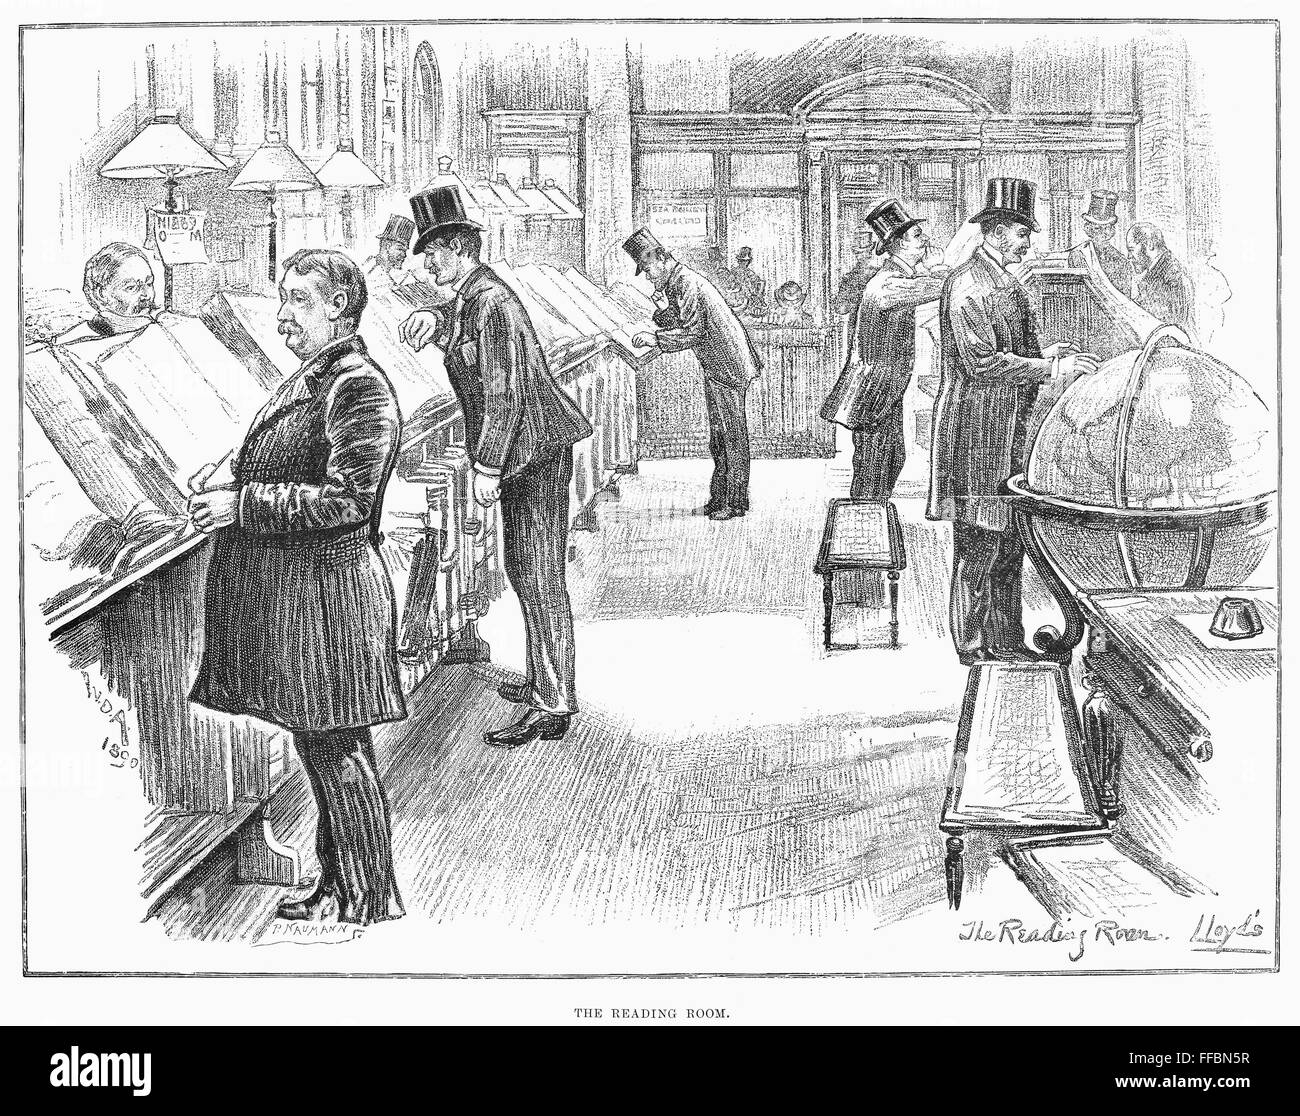 LLOYD'S OF LONDON, 1890. /nThe Reading Room of Lloyd's of London, the English insurance company, in the Royal Exchange. Line engraving, English, 1890. Stock Photo